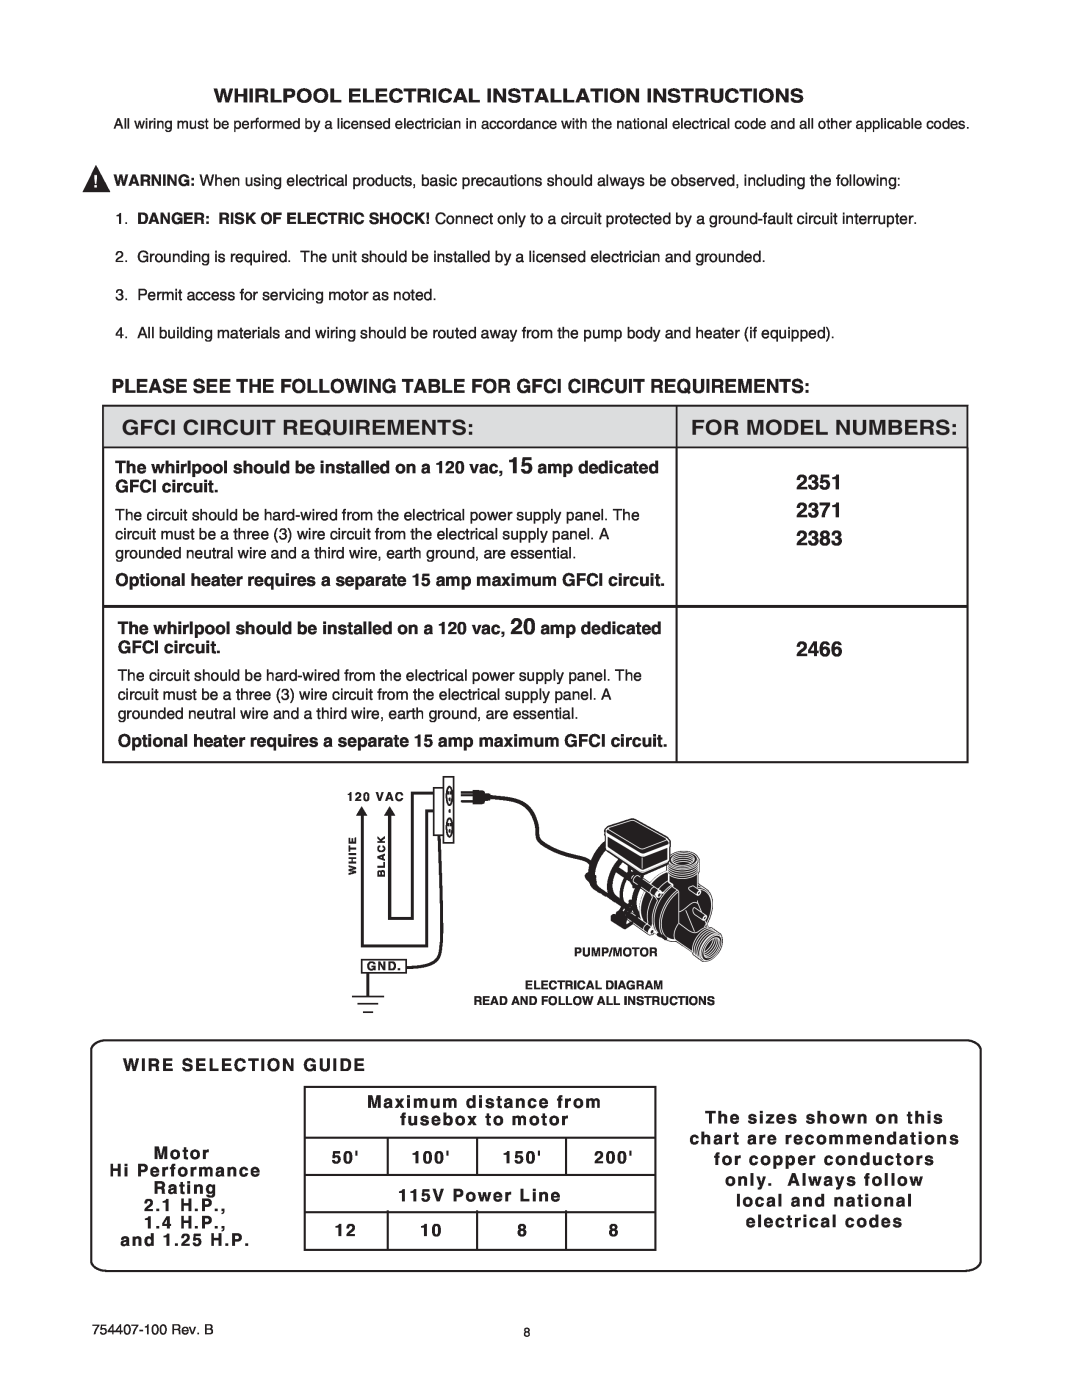 American Standard 2383 manual Gfci Circuit Requirements, For Model Numbers, 2351, 2371, 2466 